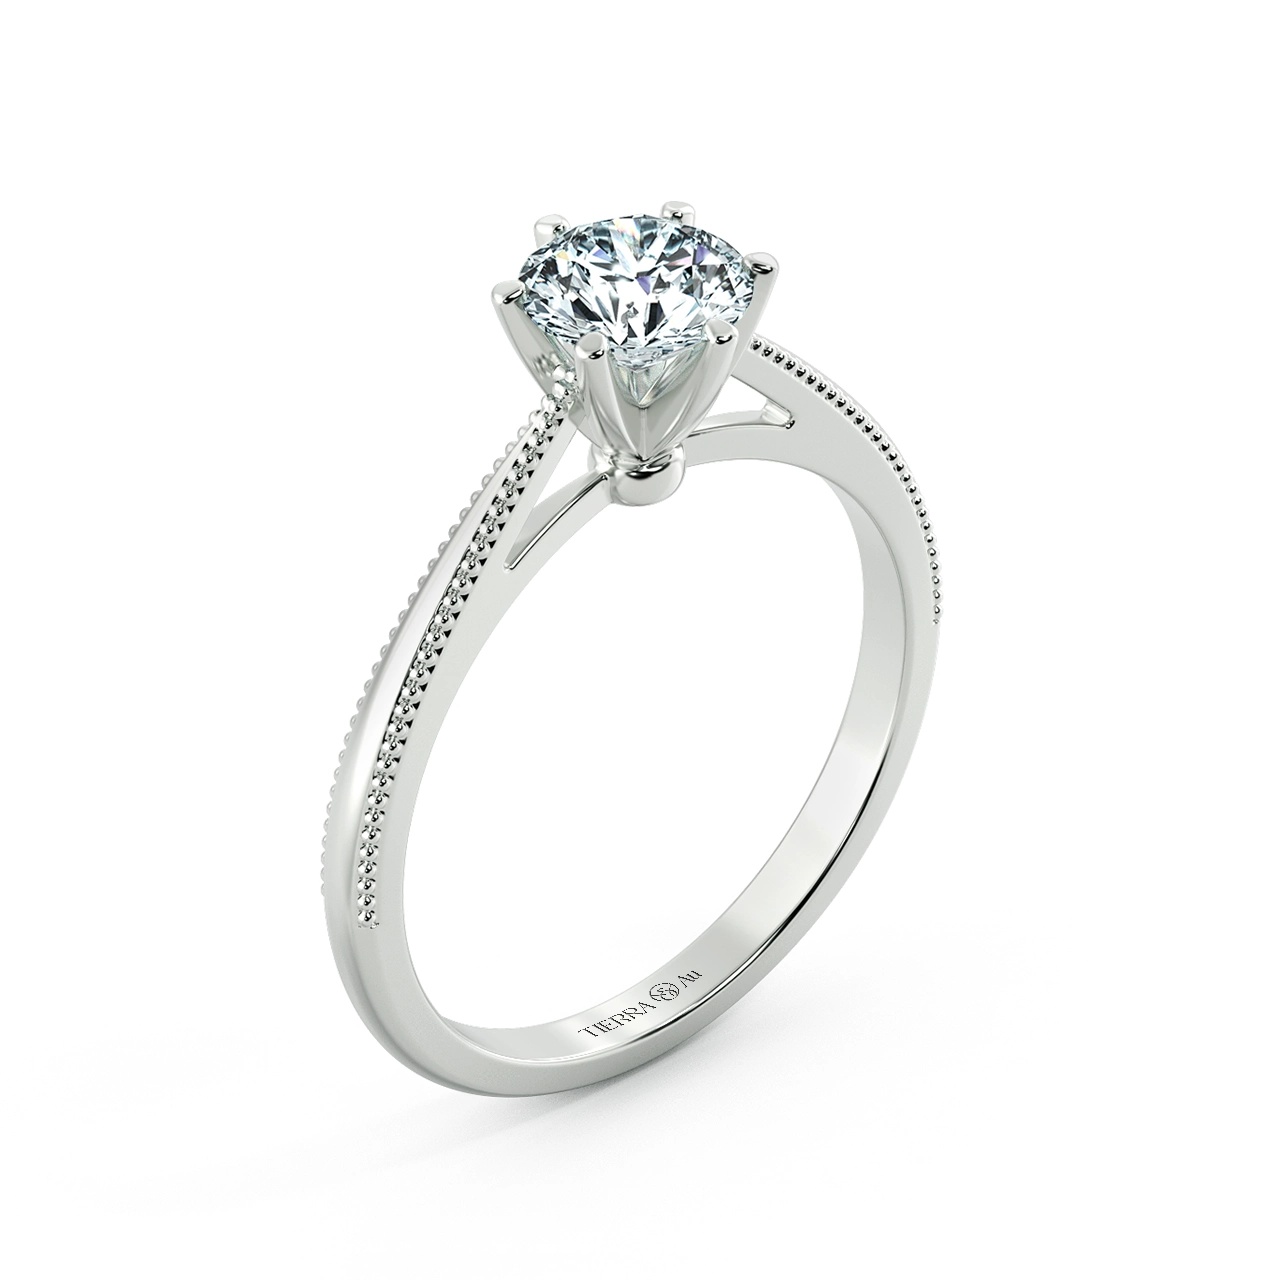 Shiny Cathedral Engagement Ring with Milgrain Band and Six Prong Setting NCH1502 4